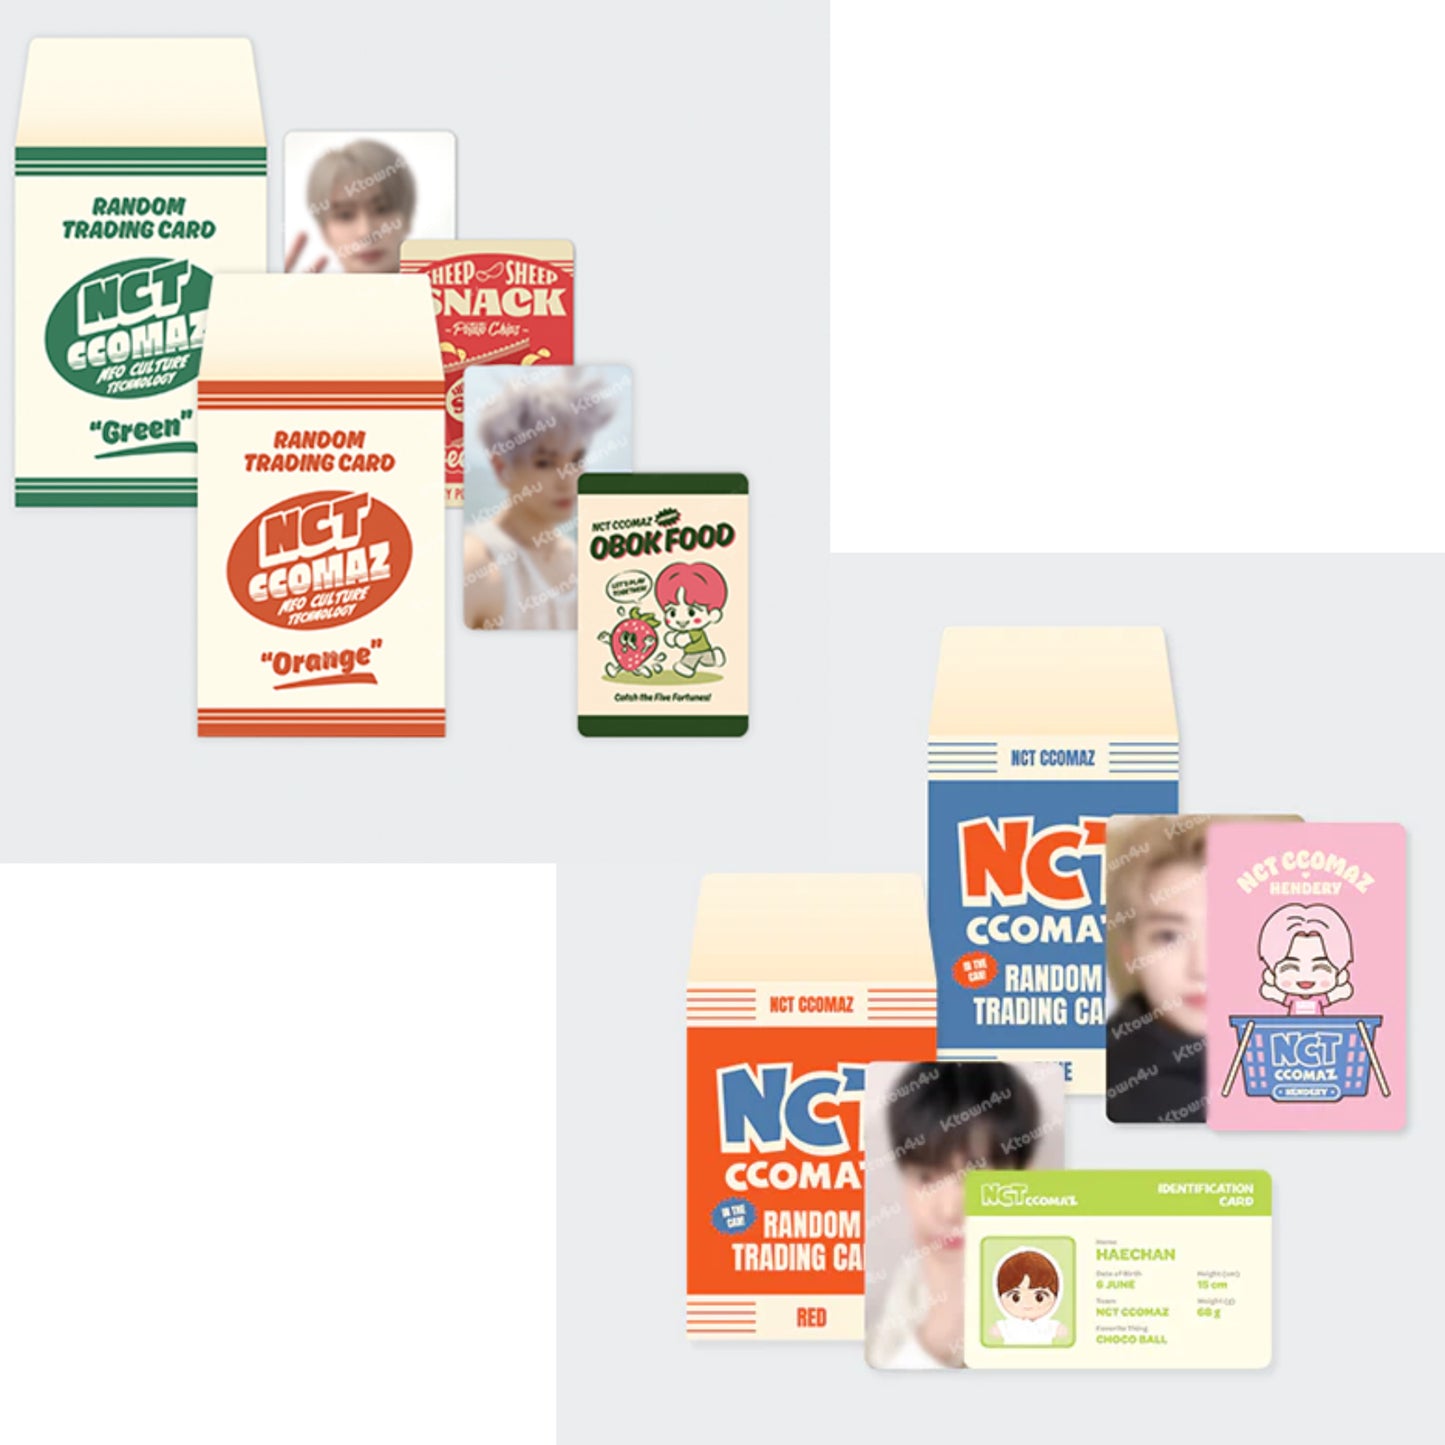 (4 PACK SET) NCT CCOMAZ TRADING CARDS